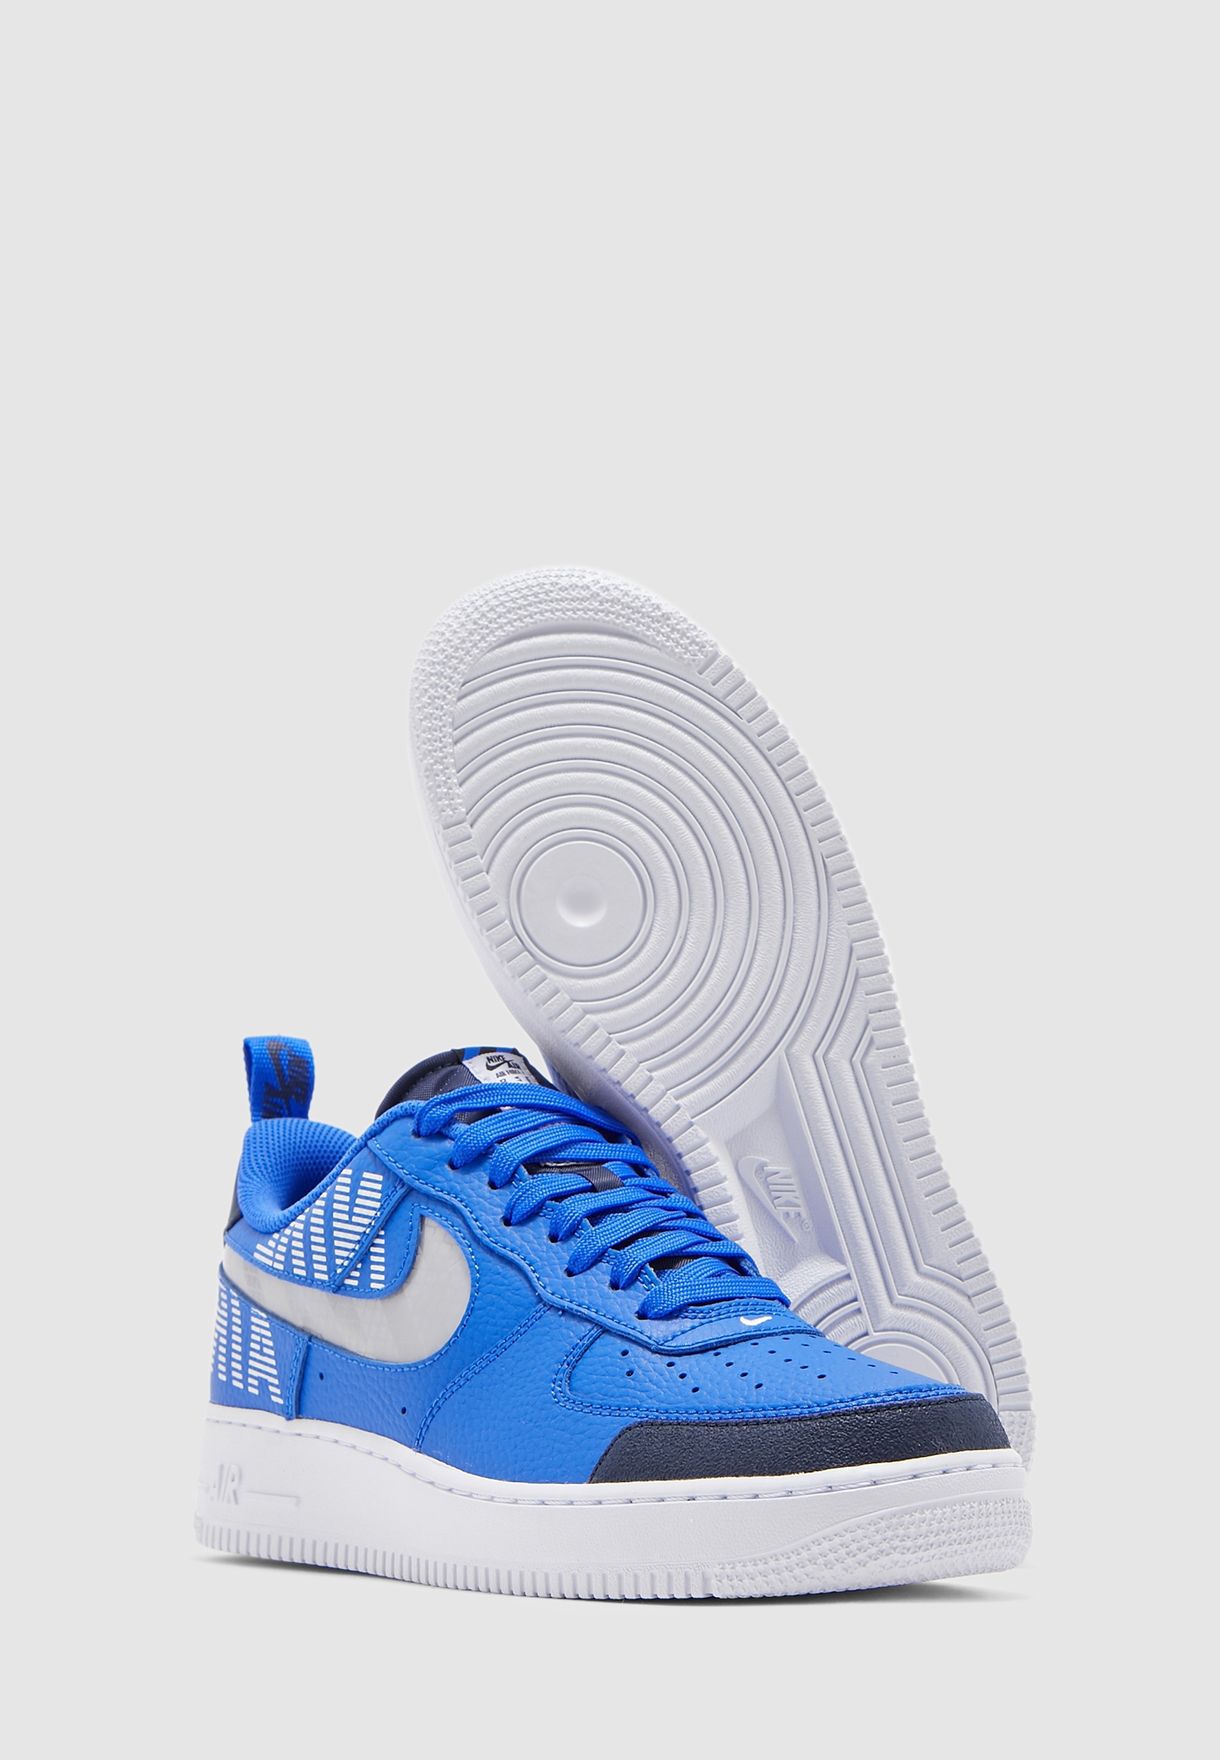 blue air force 1 07 lv8 trainers